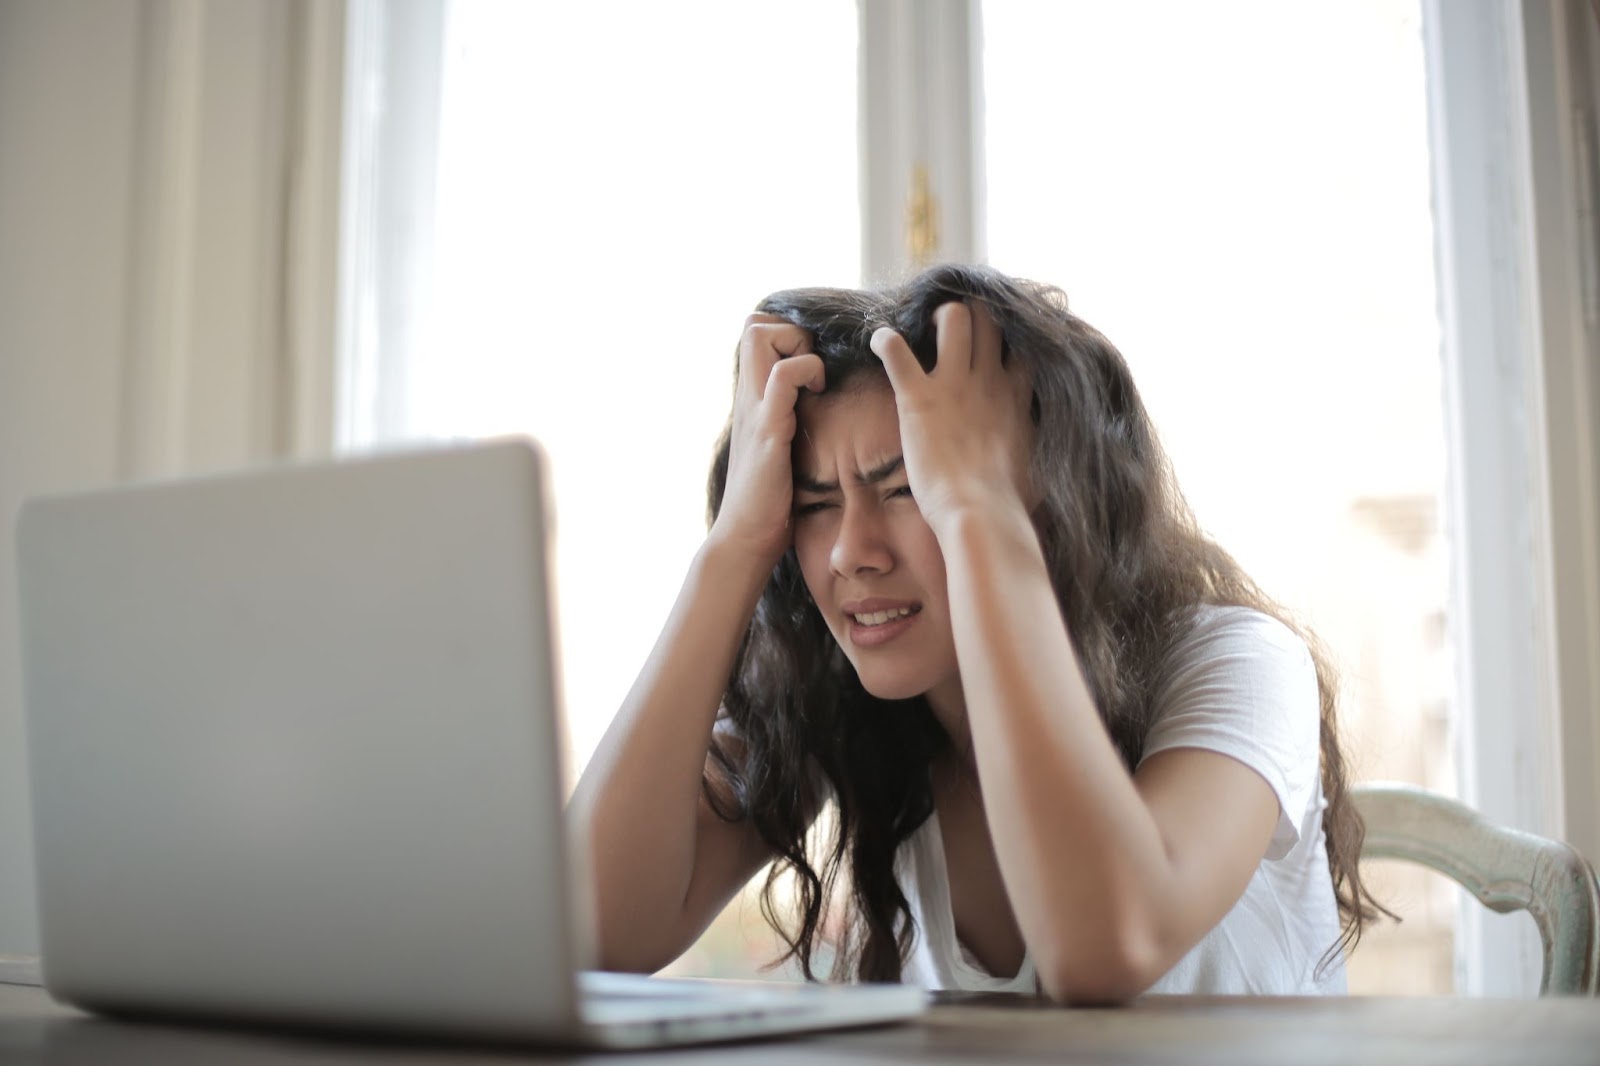 An image of a woman looking frustrated at her laptop.